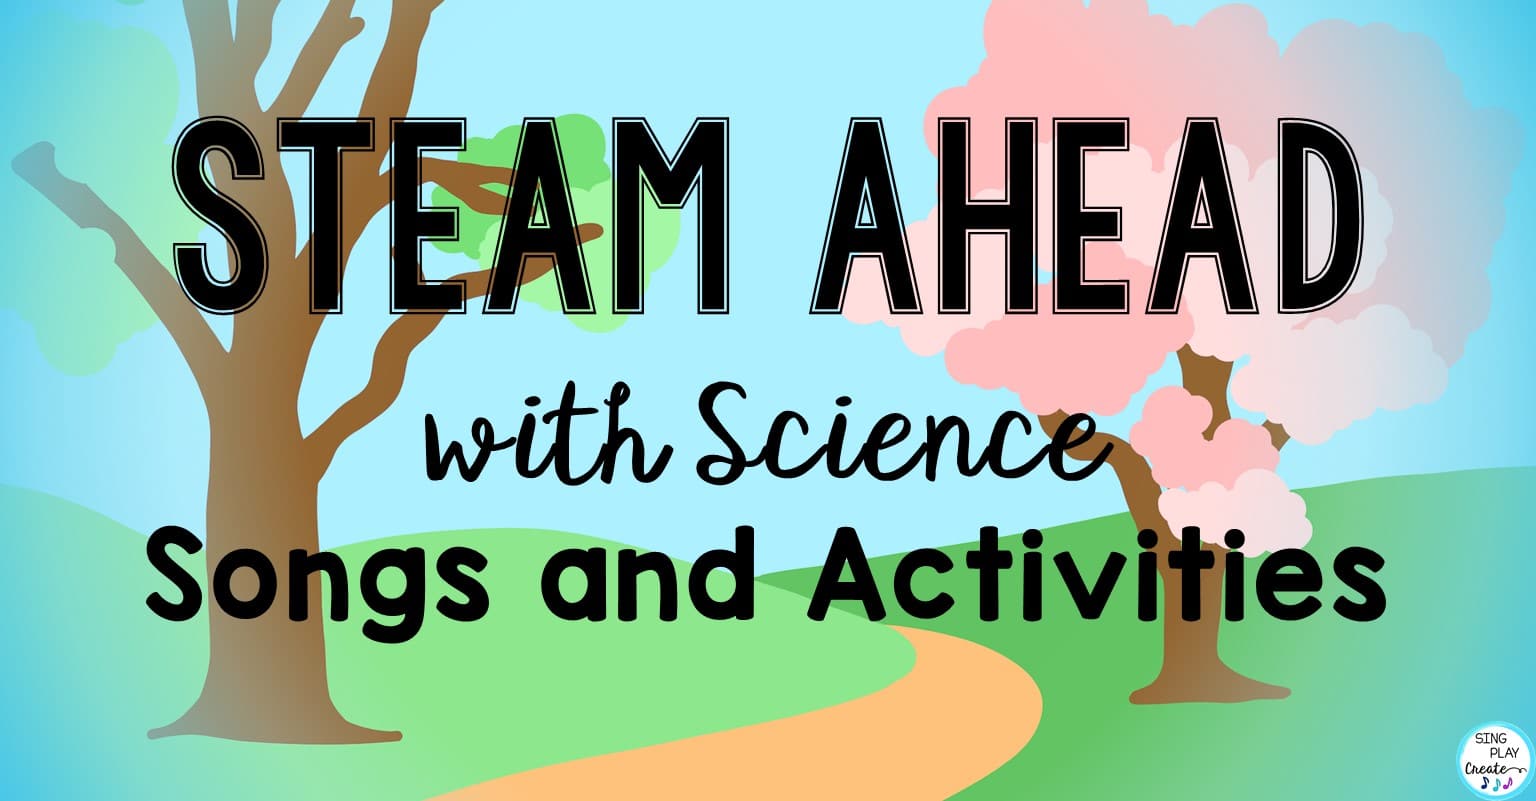 You are currently viewing Steam Ahead with Science Songs